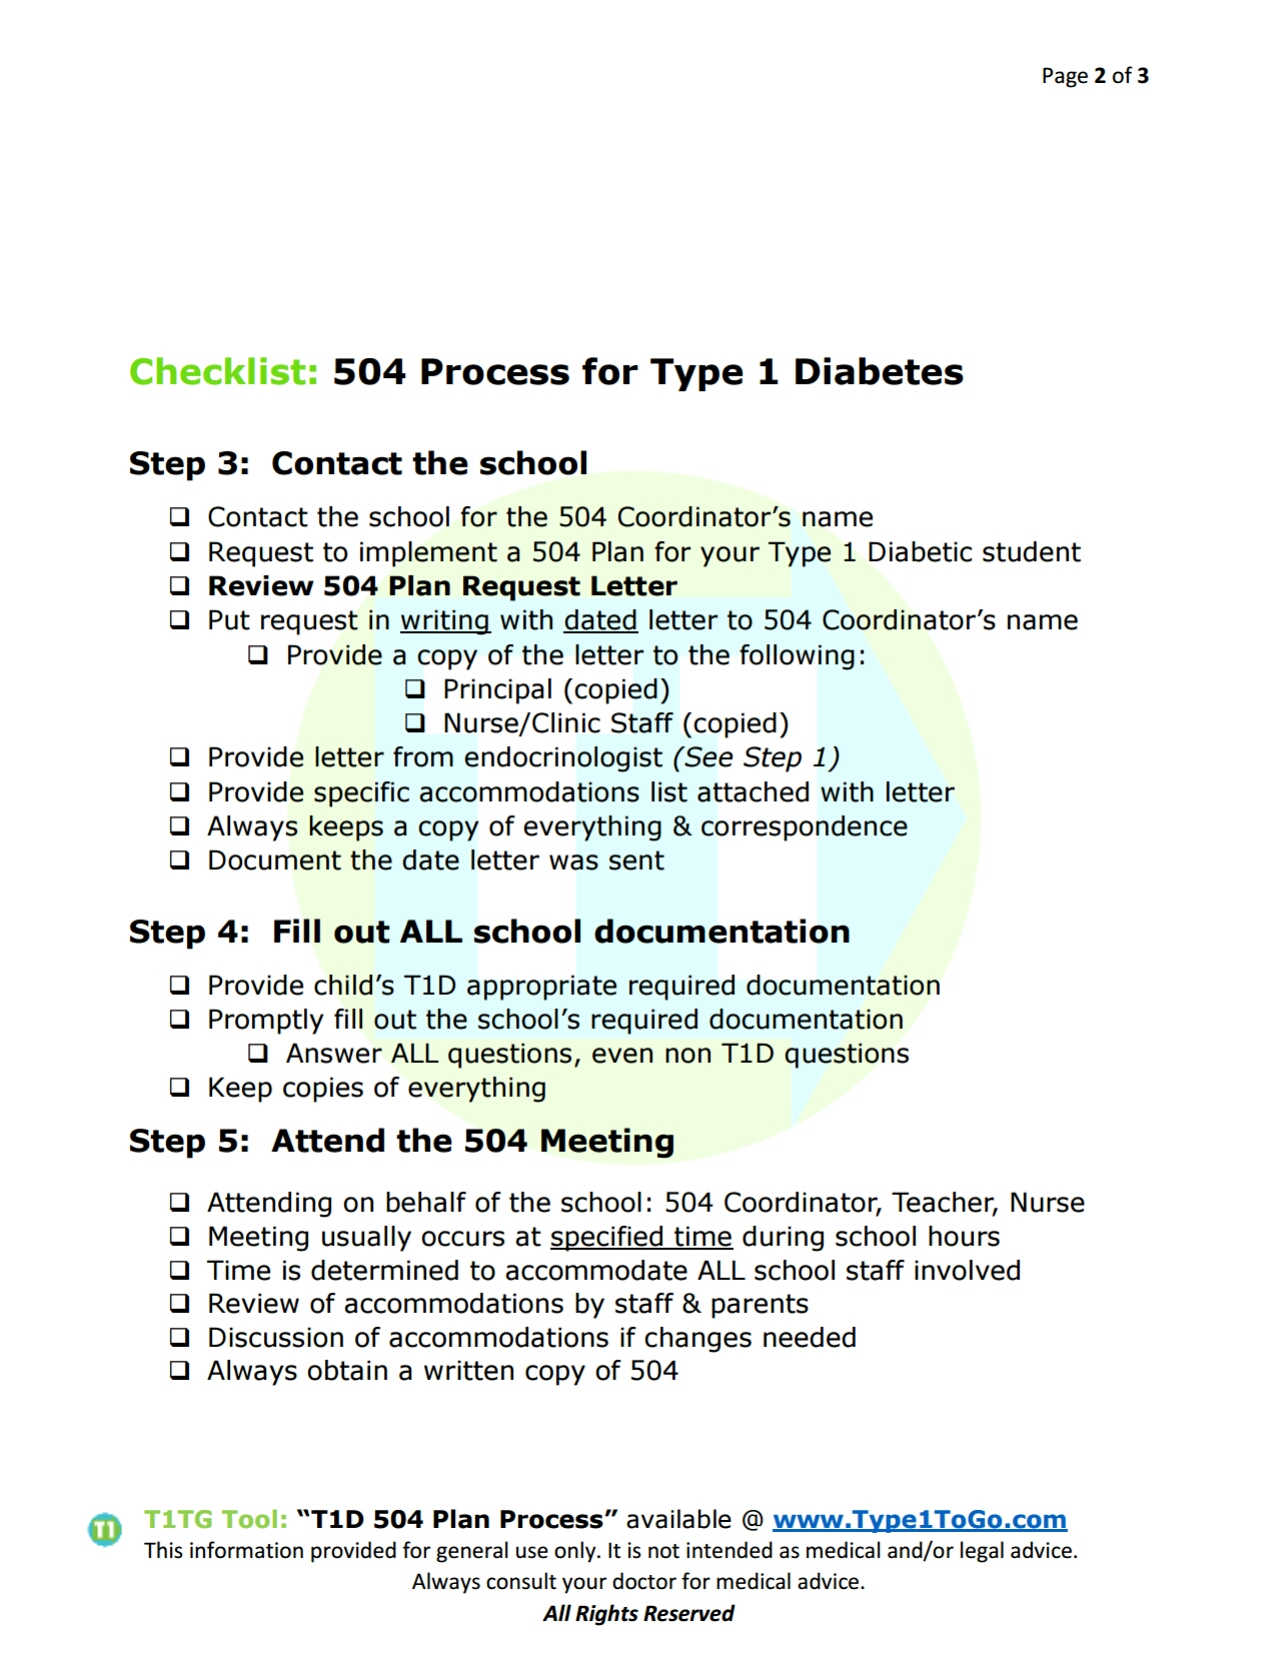 504 accommodation plan for type 1 diabetes